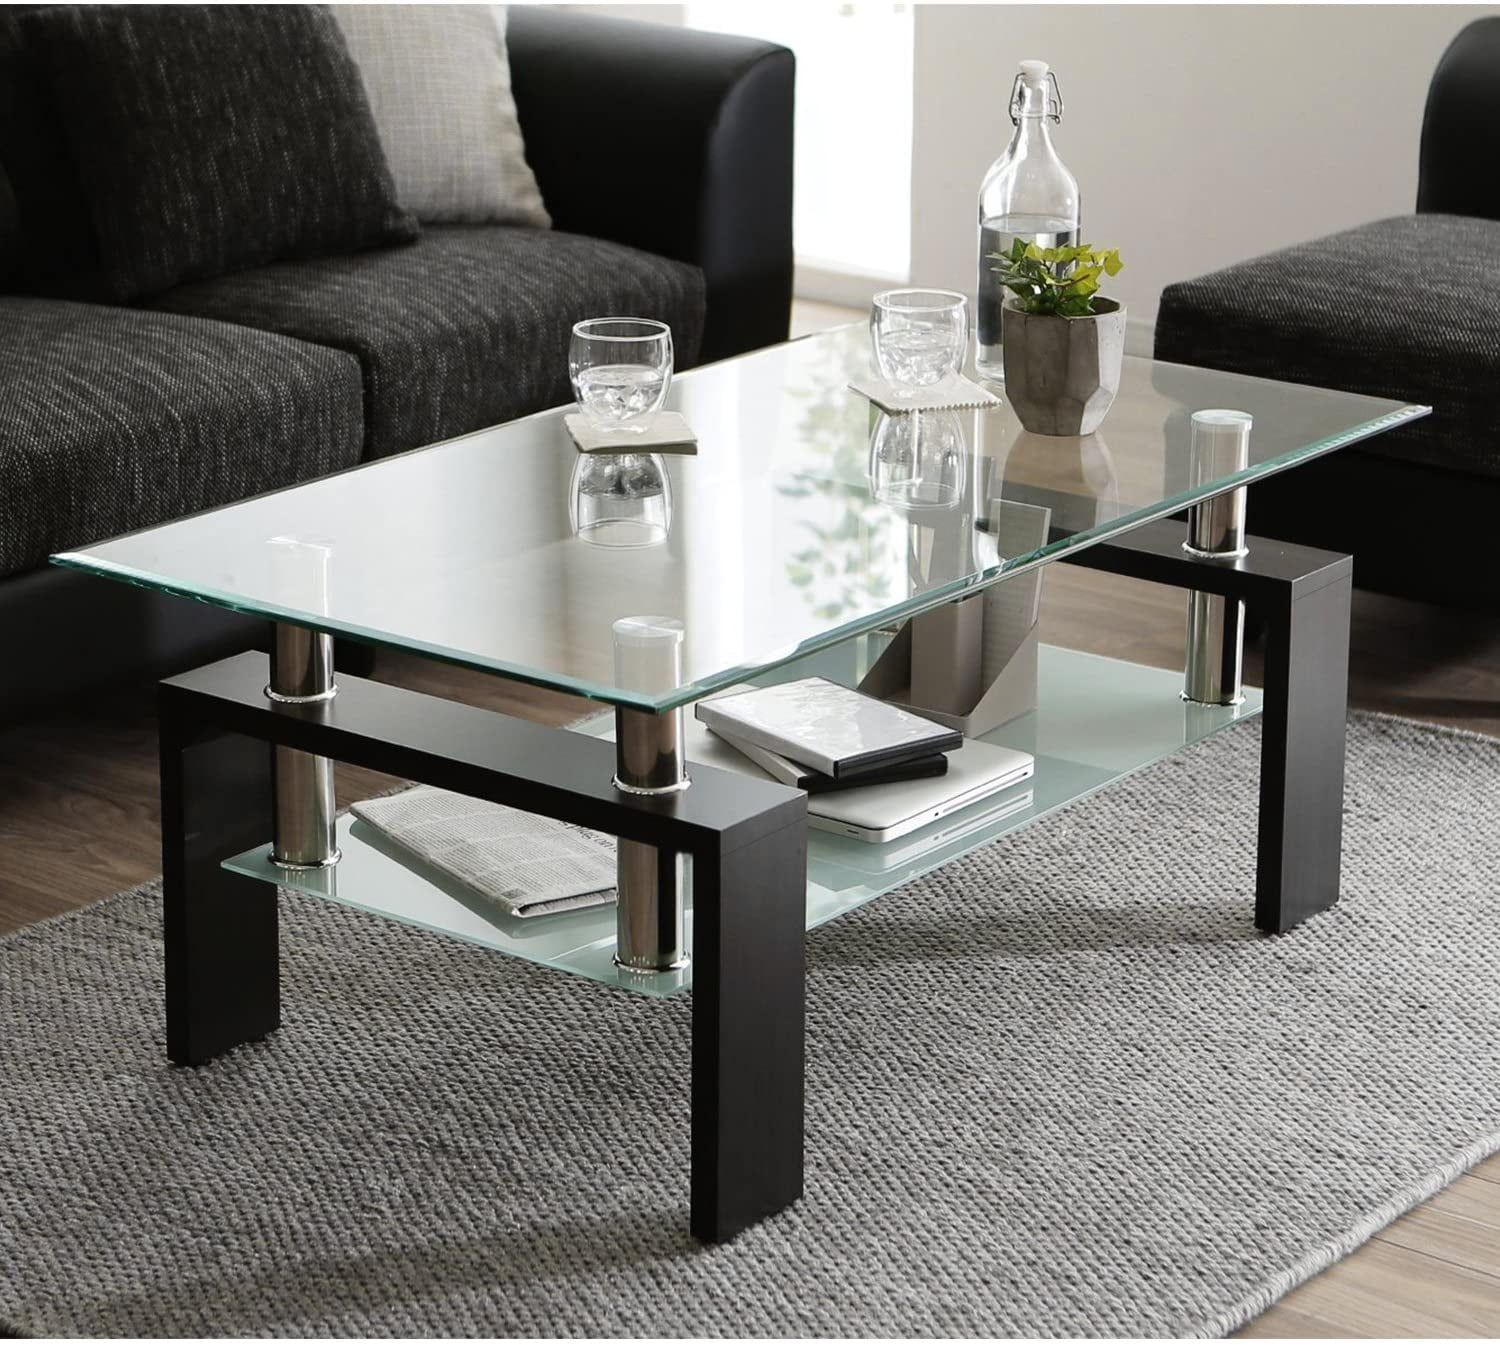 Buy Clear Rectangle Modern Glass Coffee Table With Lower Shelf, Metal Pertaining To Glass Coffee Tables With Lower Shelves (Gallery 1 of 20)